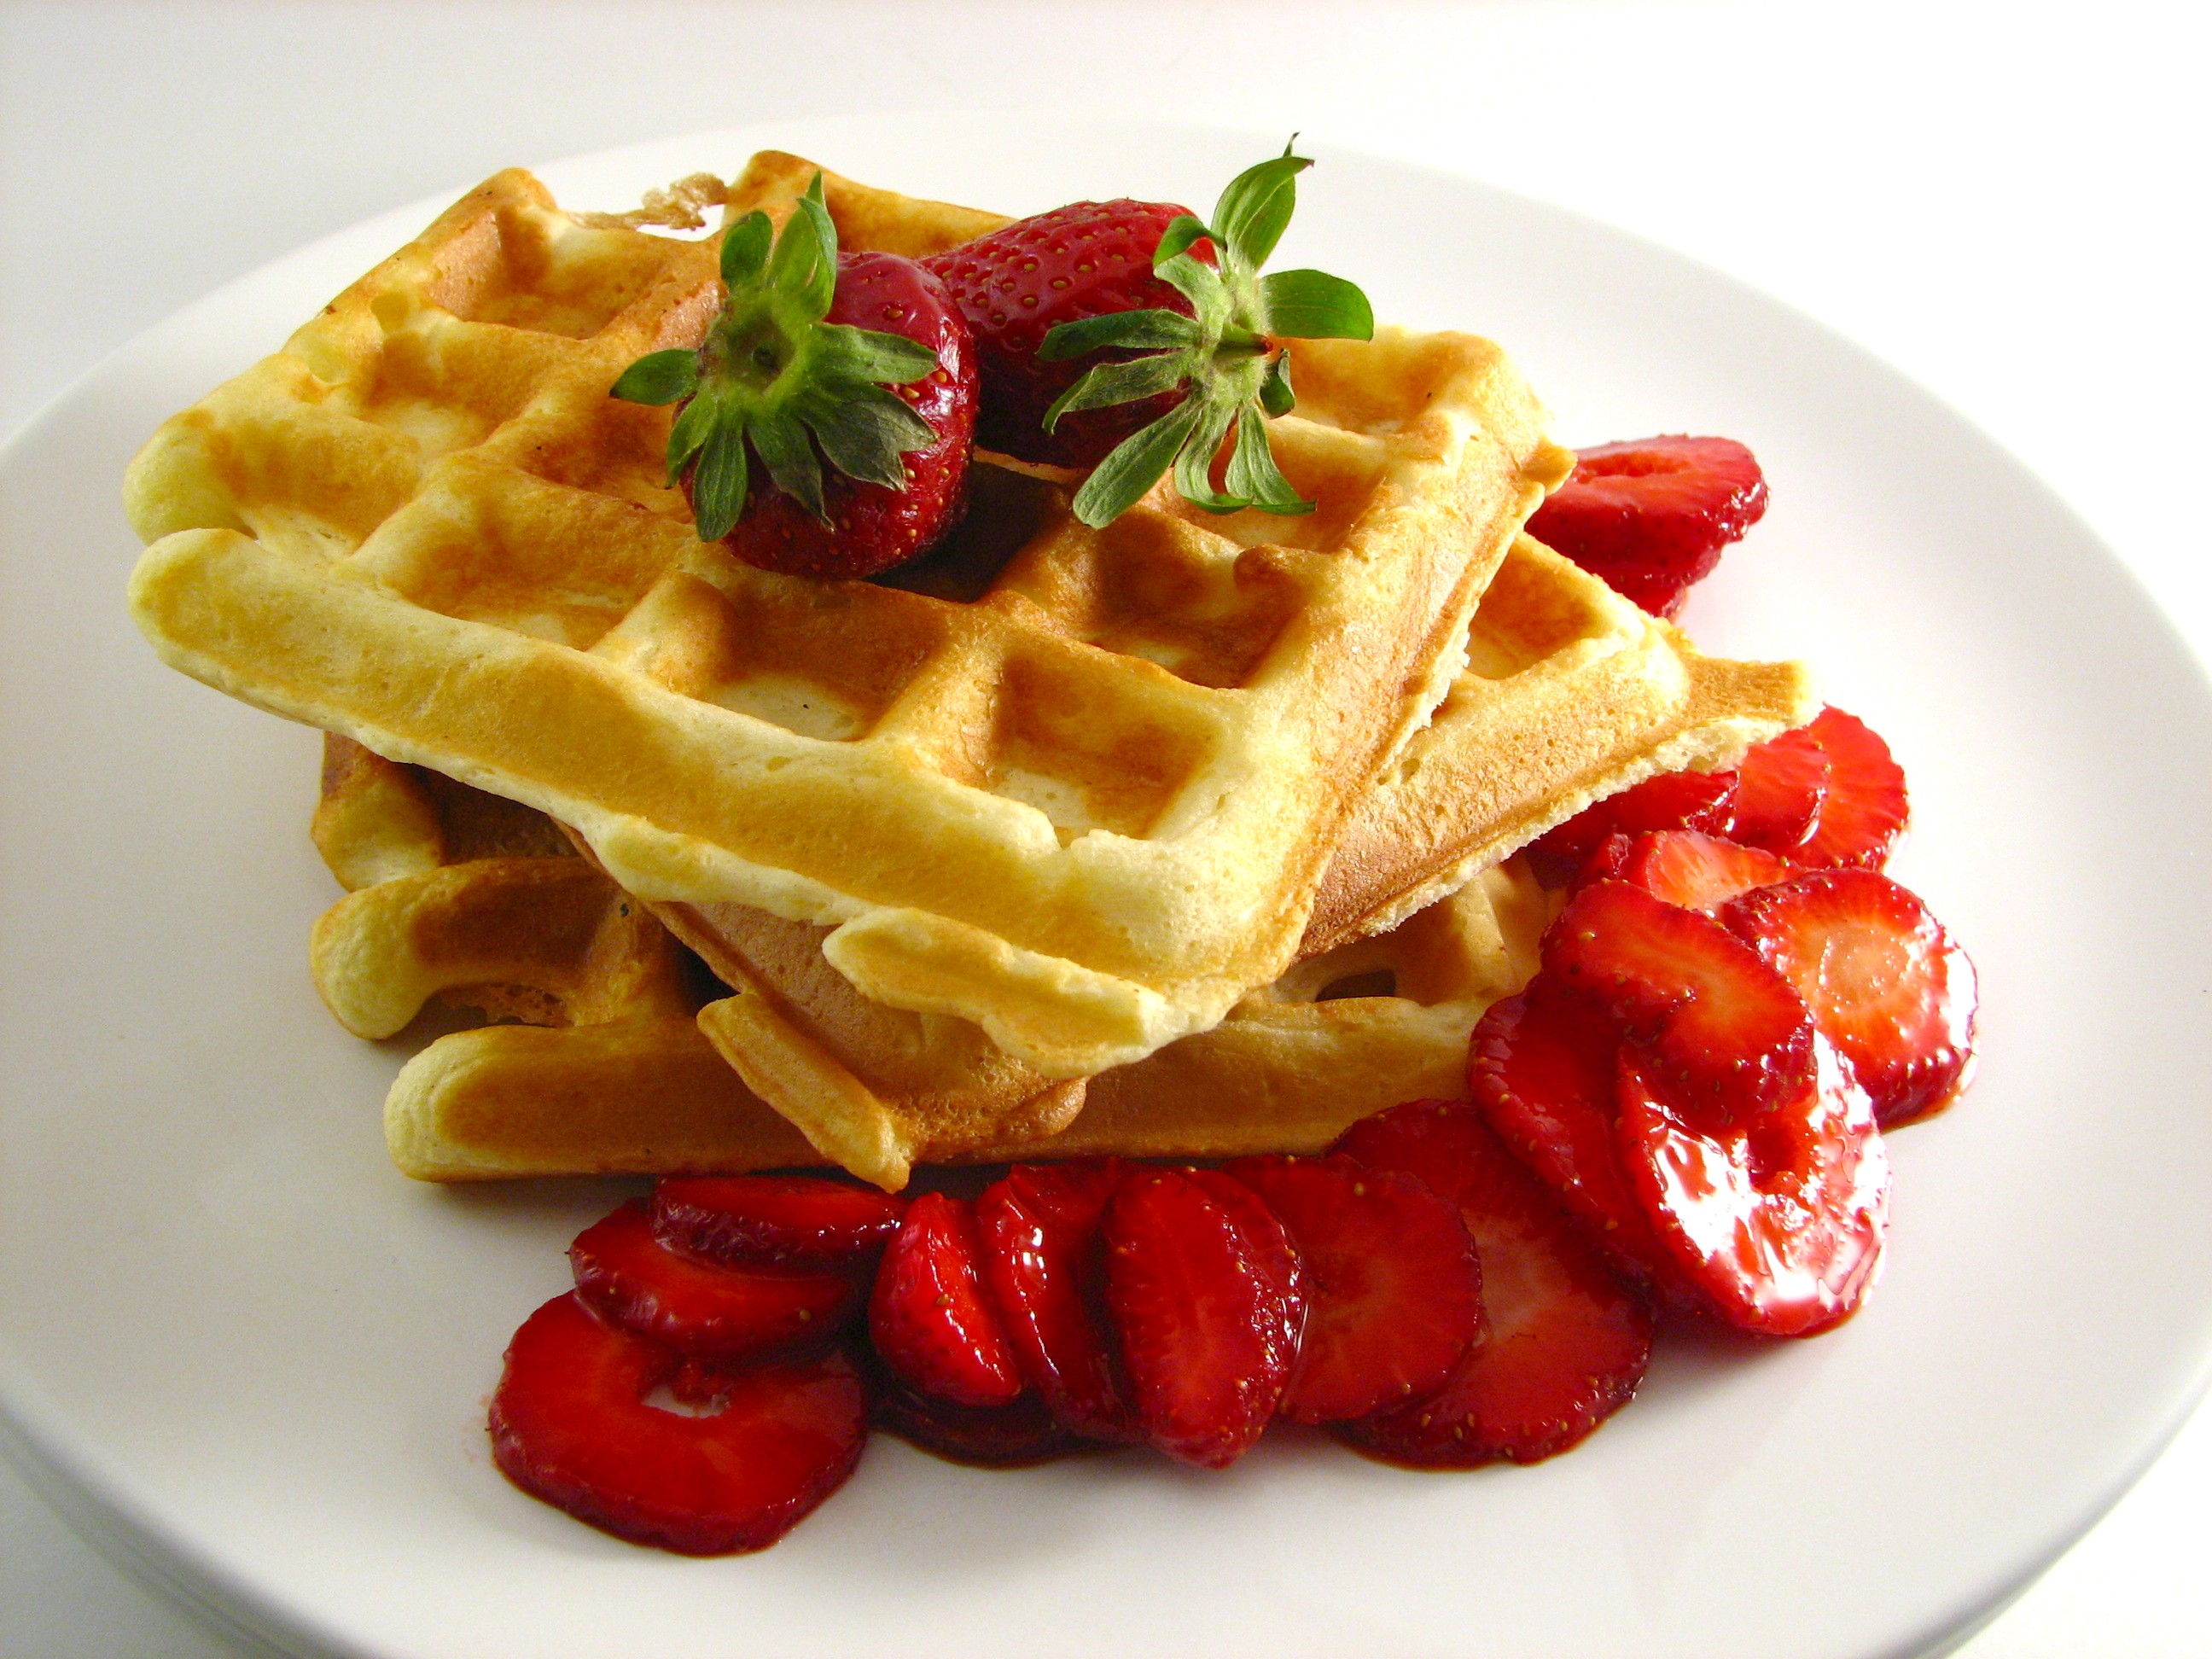 File:Waffles with Strawberries.jpg - Wikimedia Commons